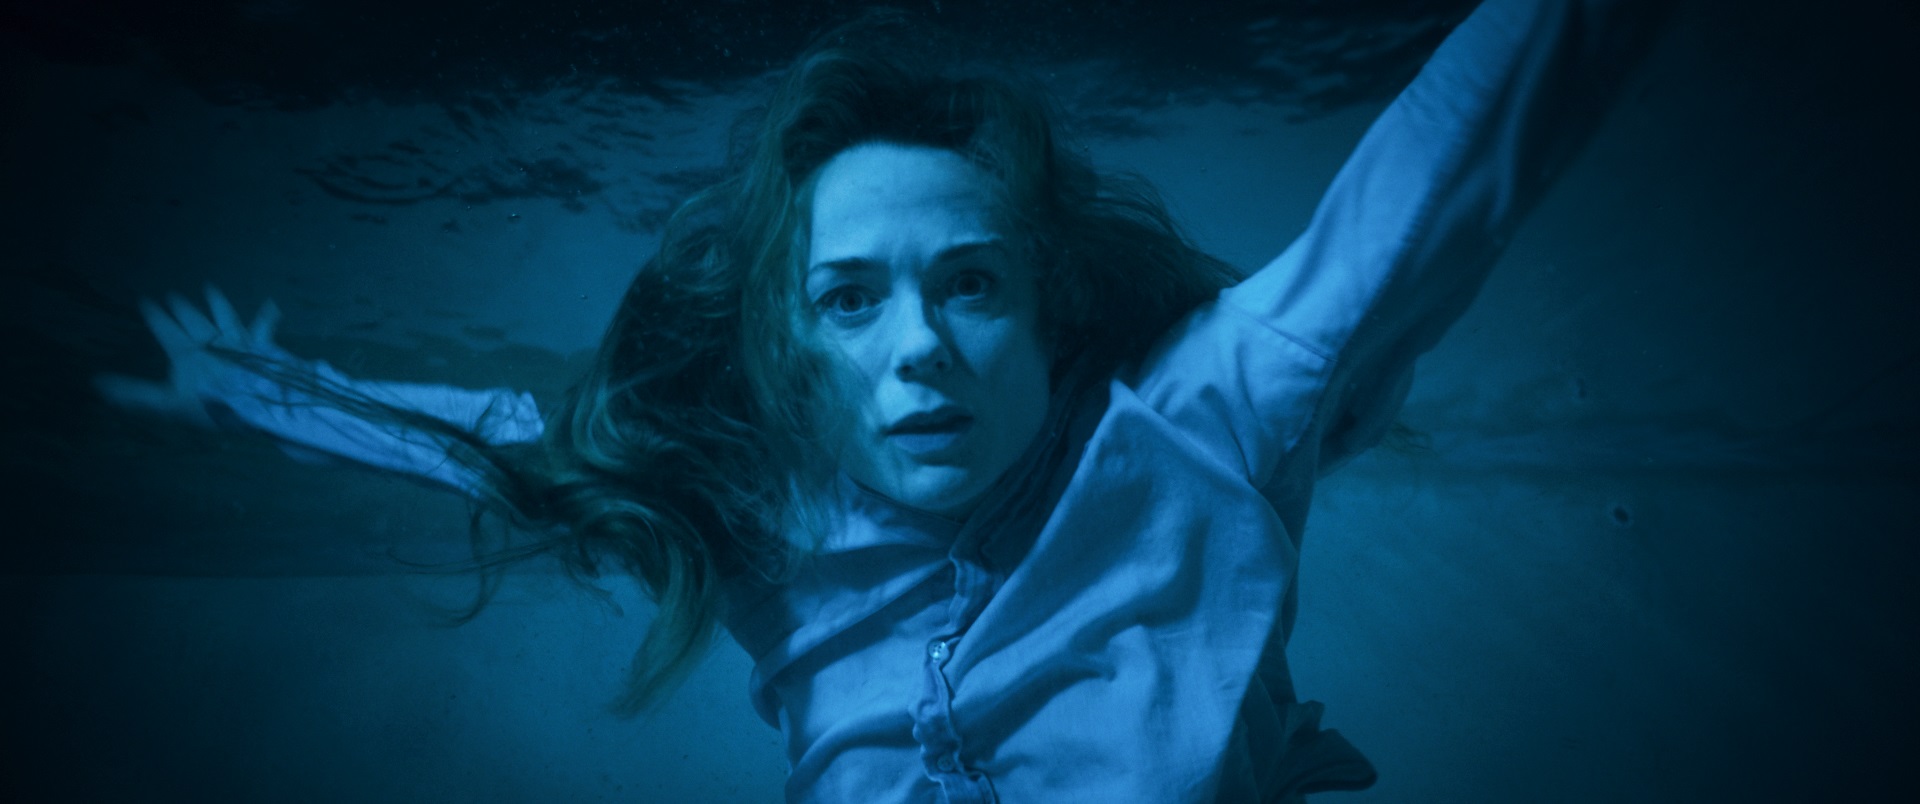 Night Swim Pool Party Possession Featurette Shows Complexity of Water Shoots